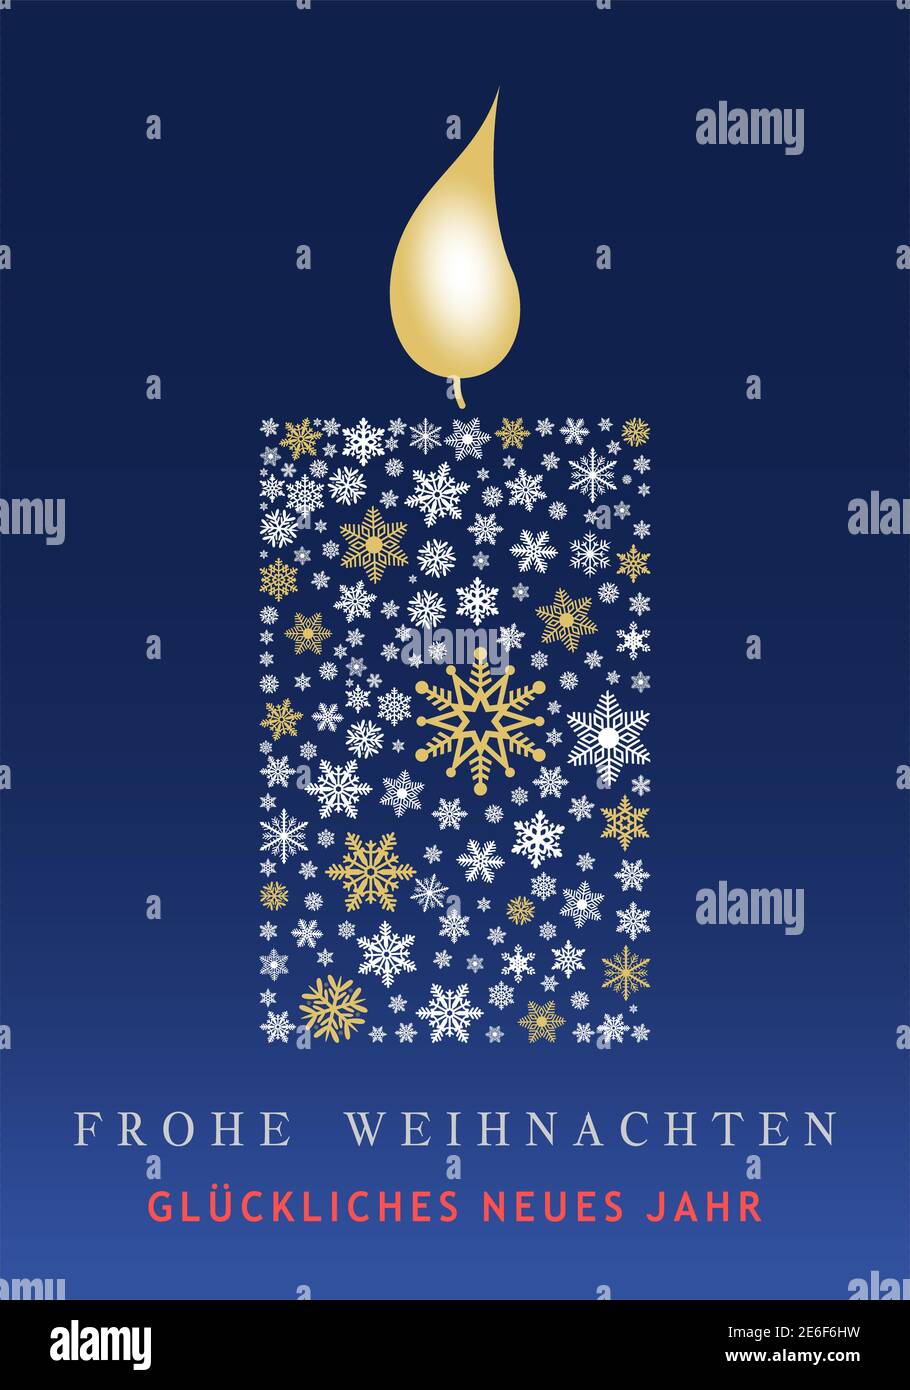 Christmas candle vector with snowflakes and german greetings. Frohe Weihnachten is MerryChristmas, Glückliches neues Jahr is Happy New Year Stock Vector